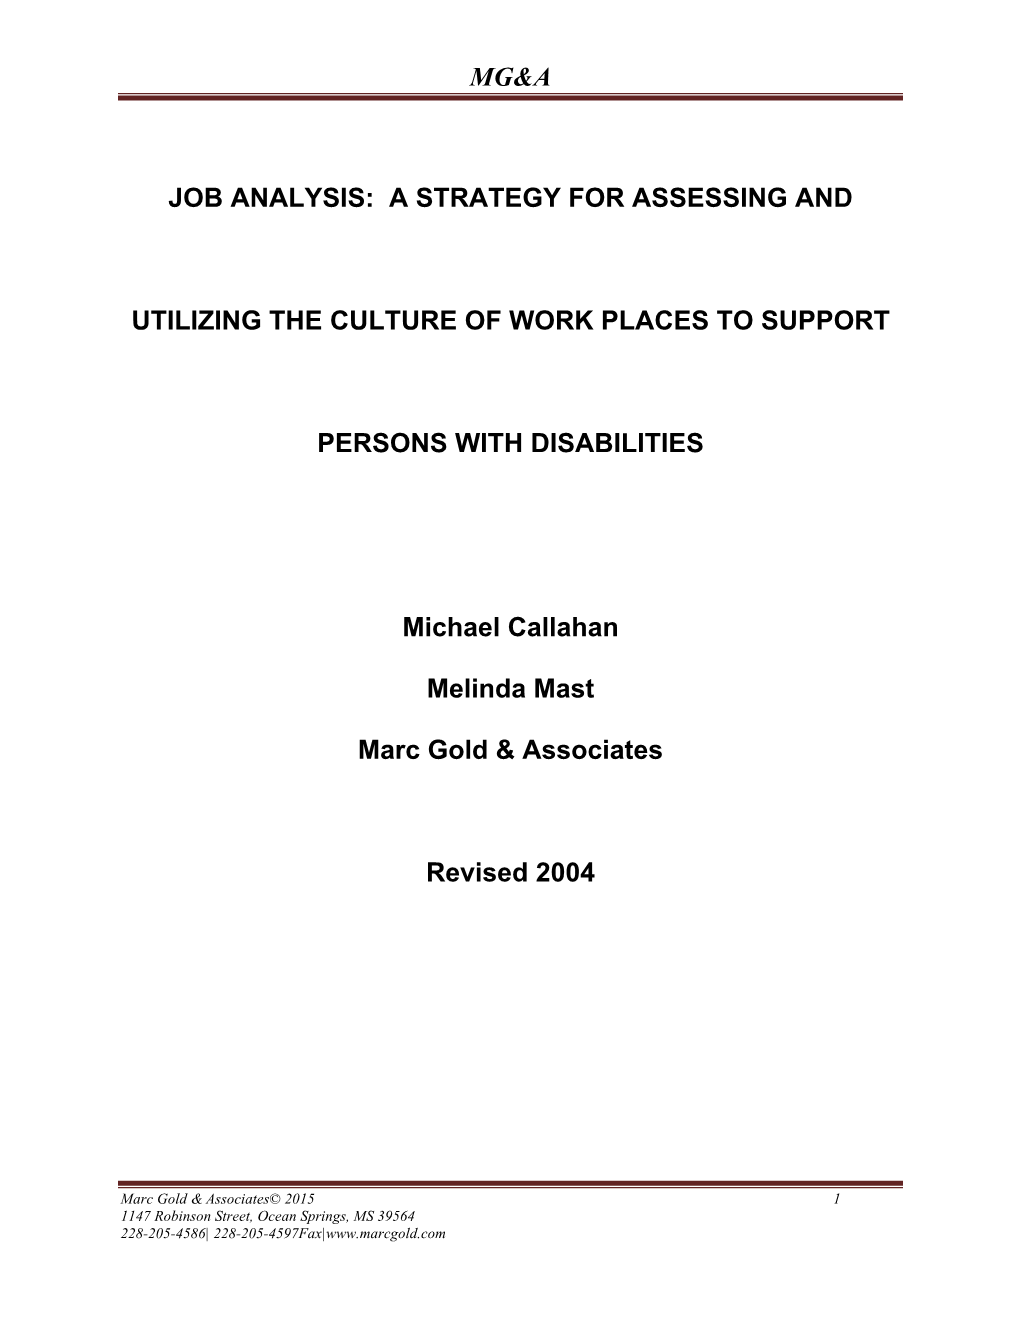 Job Analysis: a Strategy for Assessing and Utilizing the Culture of Work Places to Support Persons with Disabilities